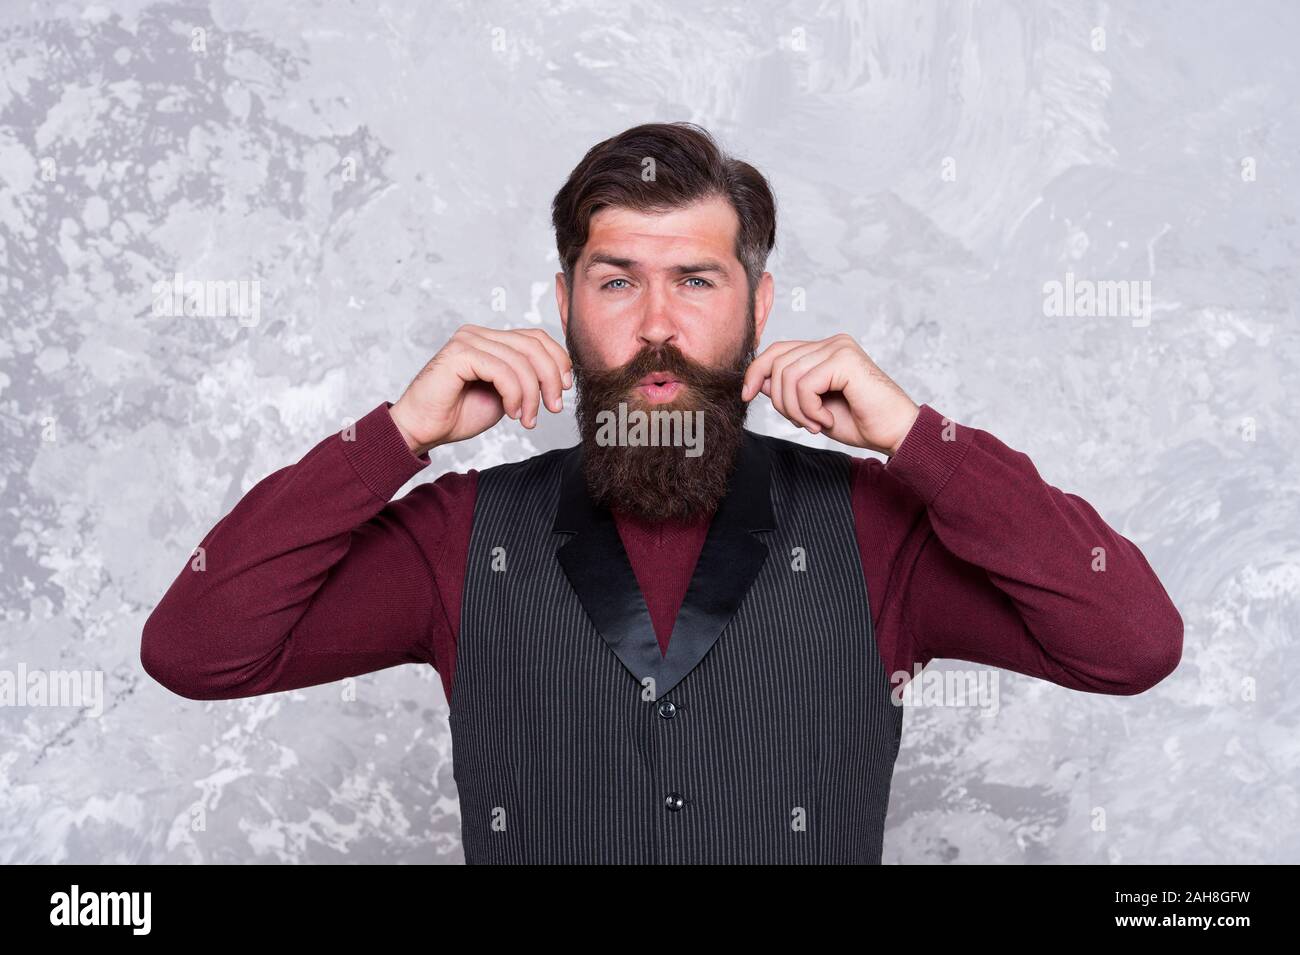 Well Trimmed Stock Photos & Well Trimmed Stock Images - Alamy